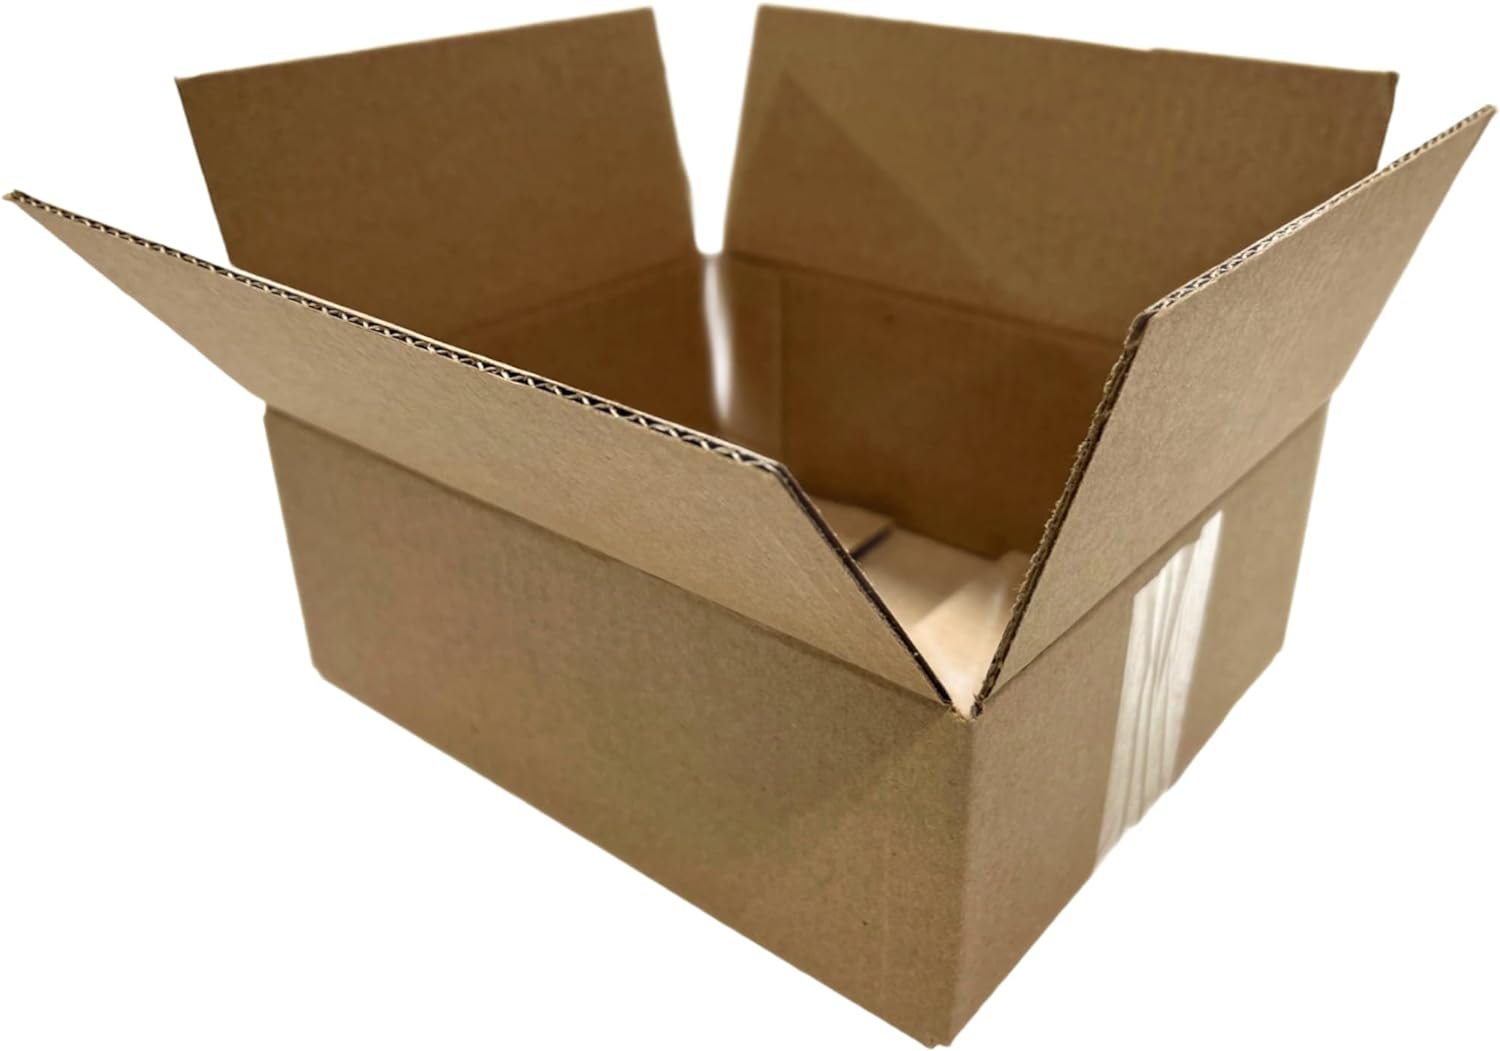 200 6x3x2 Cardboard Paper Boxes Mailing Packing Shipping Box Corrugated Carton